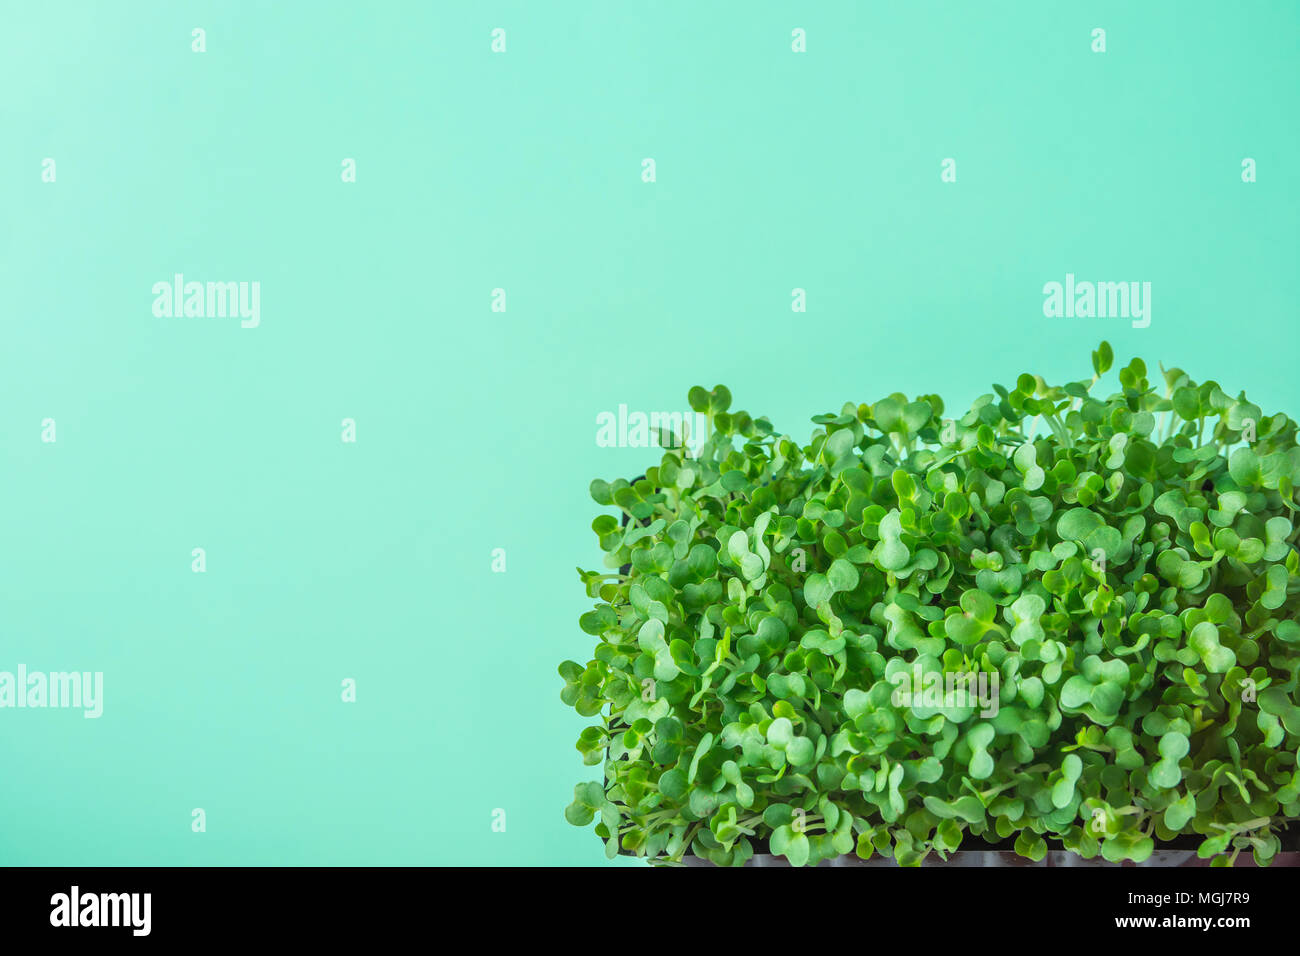 Young Fresh Green Sprouts of Potted Water Cress on Pastel Turquoise Background. Gardening Healthy Plant Based Diet Food Garnish Concept. Minimalist St Stock Photo